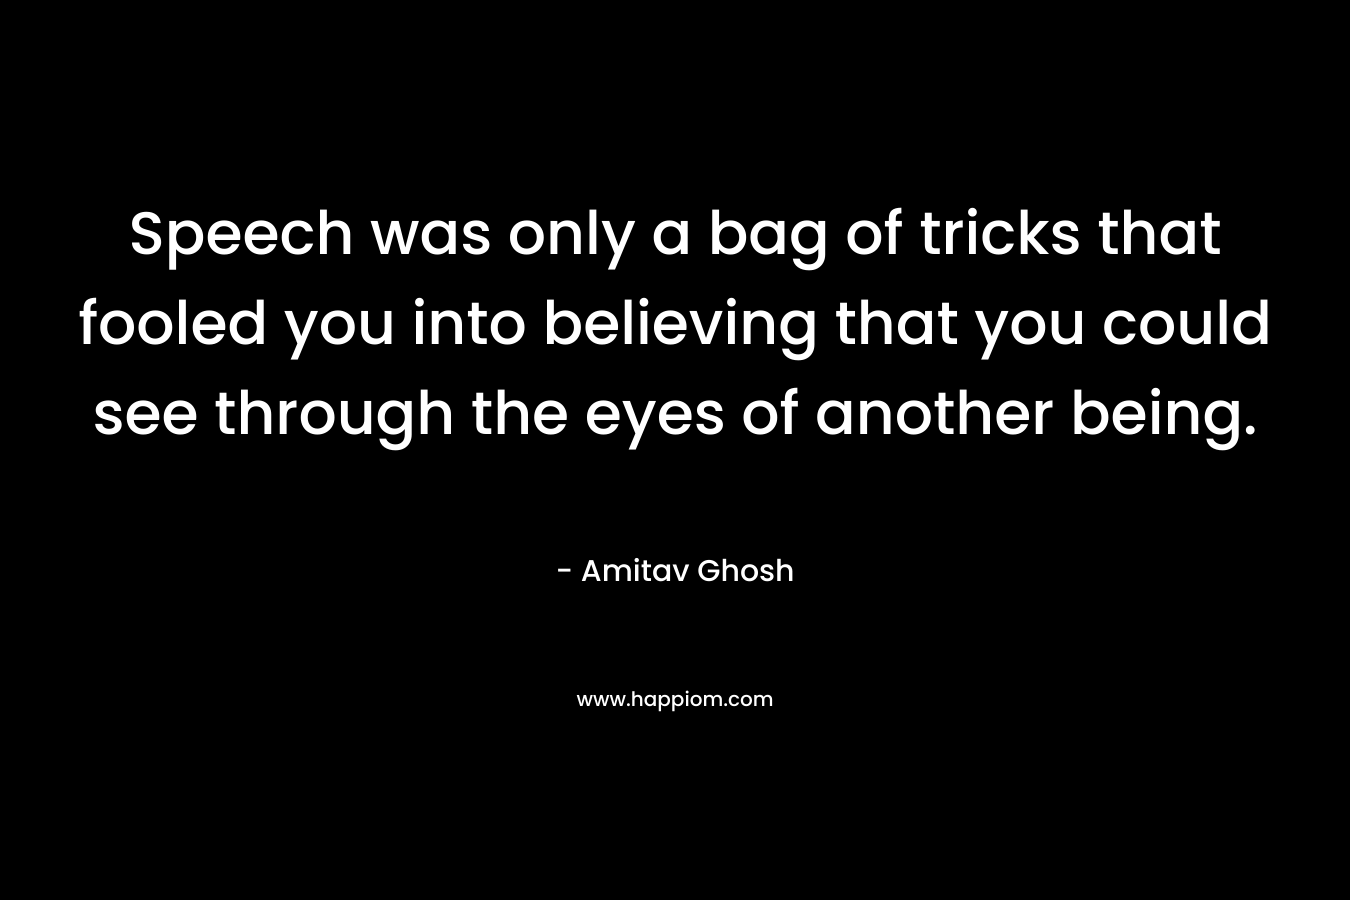 Speech was only a bag of tricks that fooled you into believing that you could see through the eyes of another being.